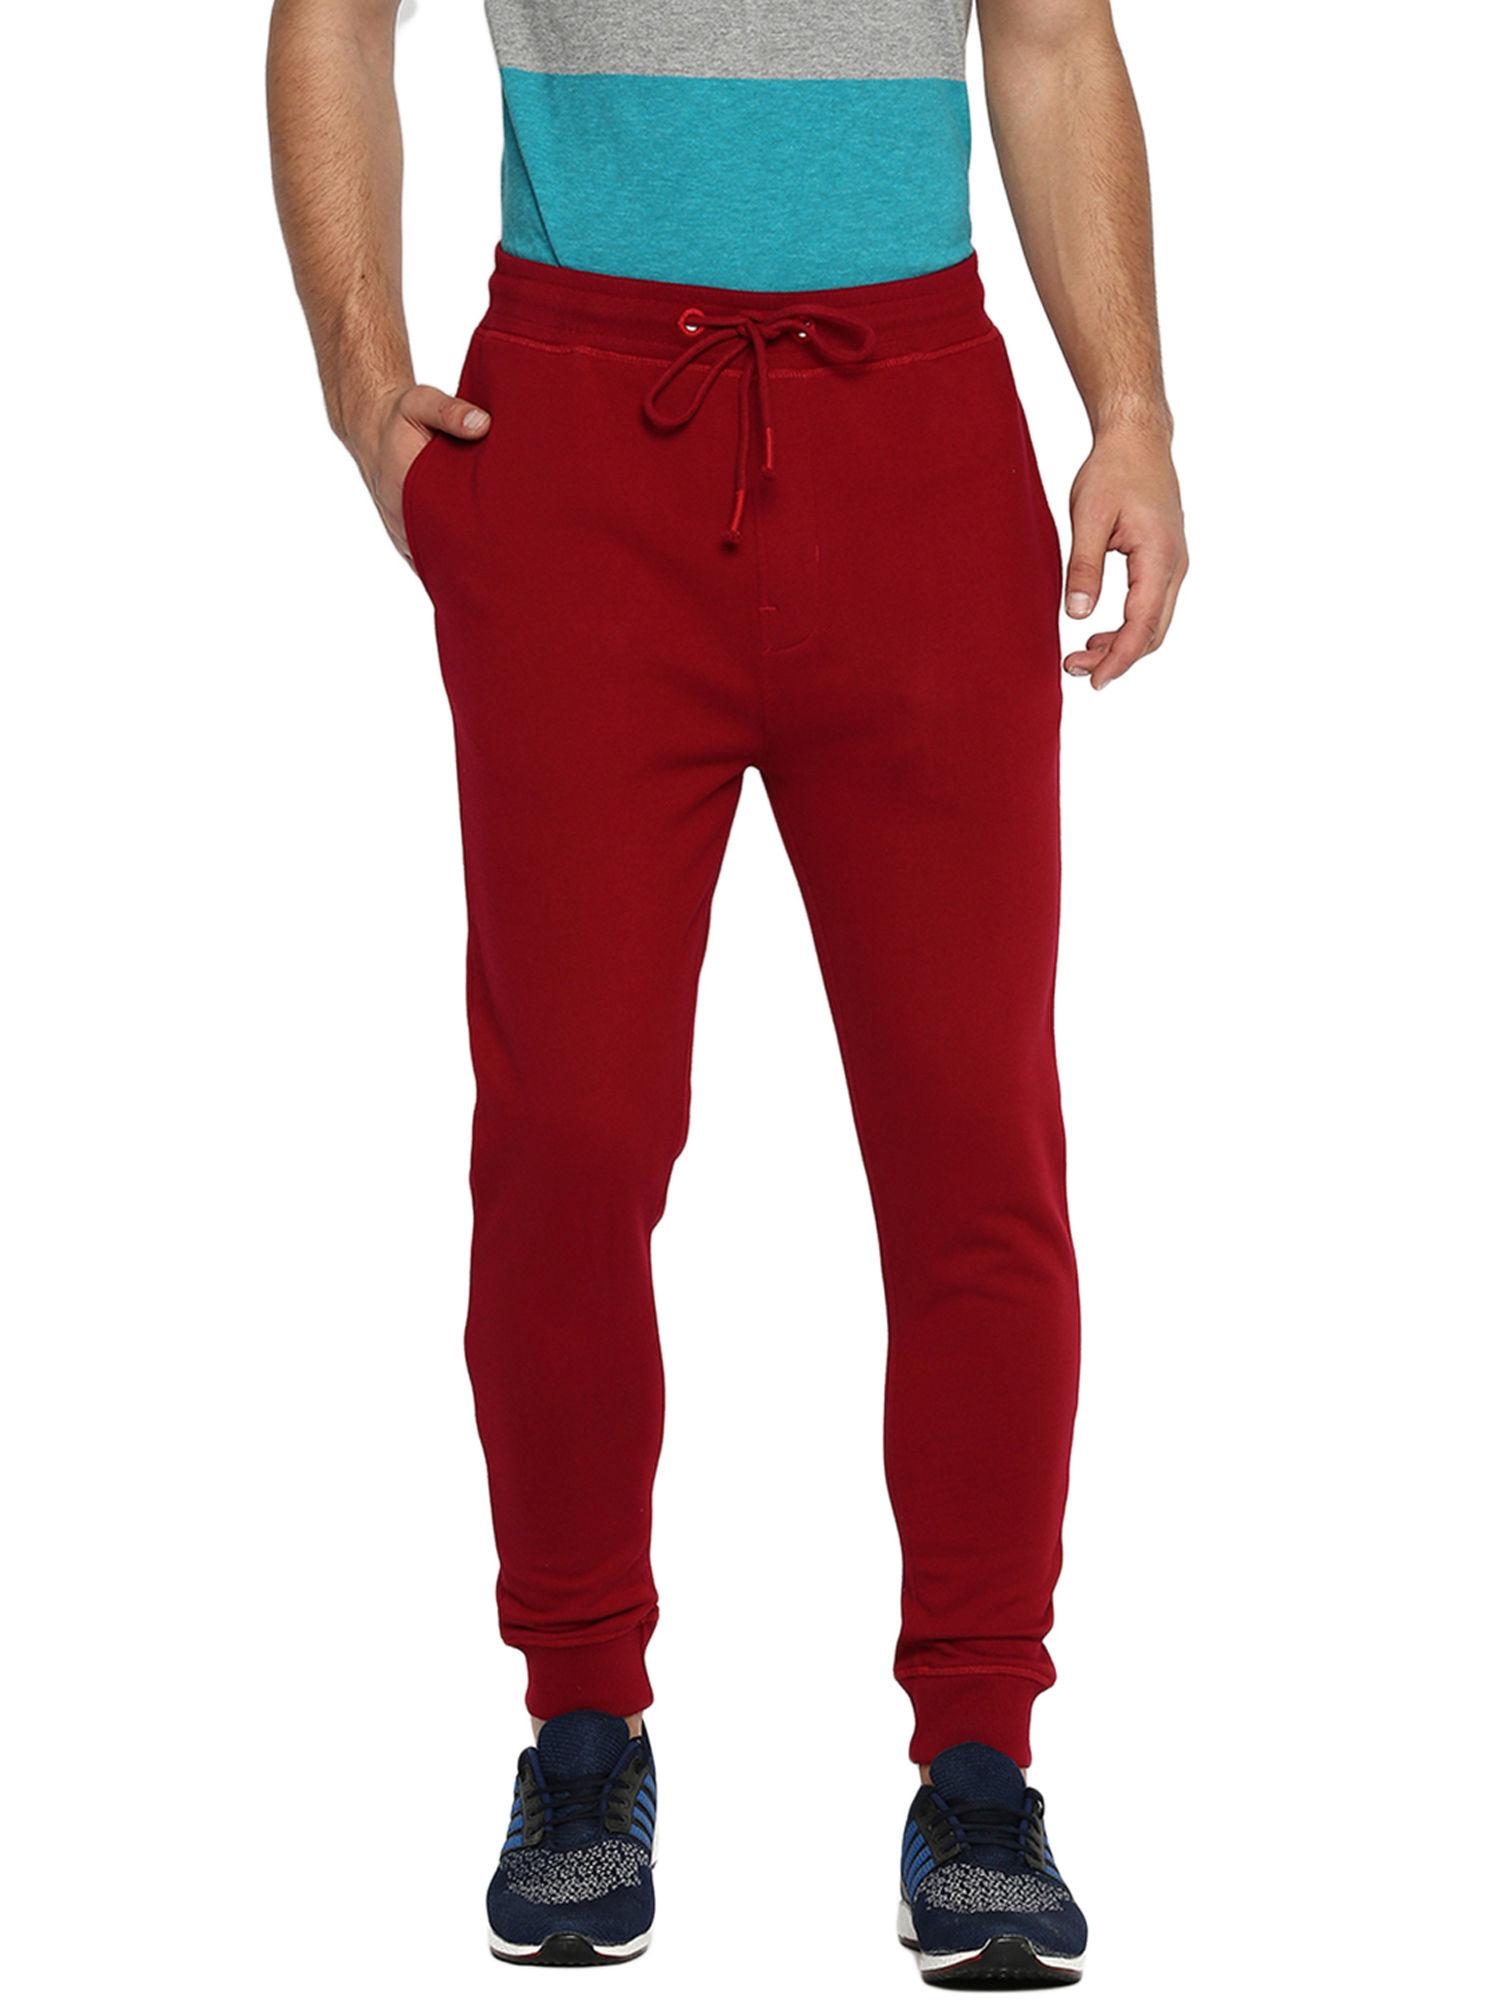 jogger fit rio red knitted track pant